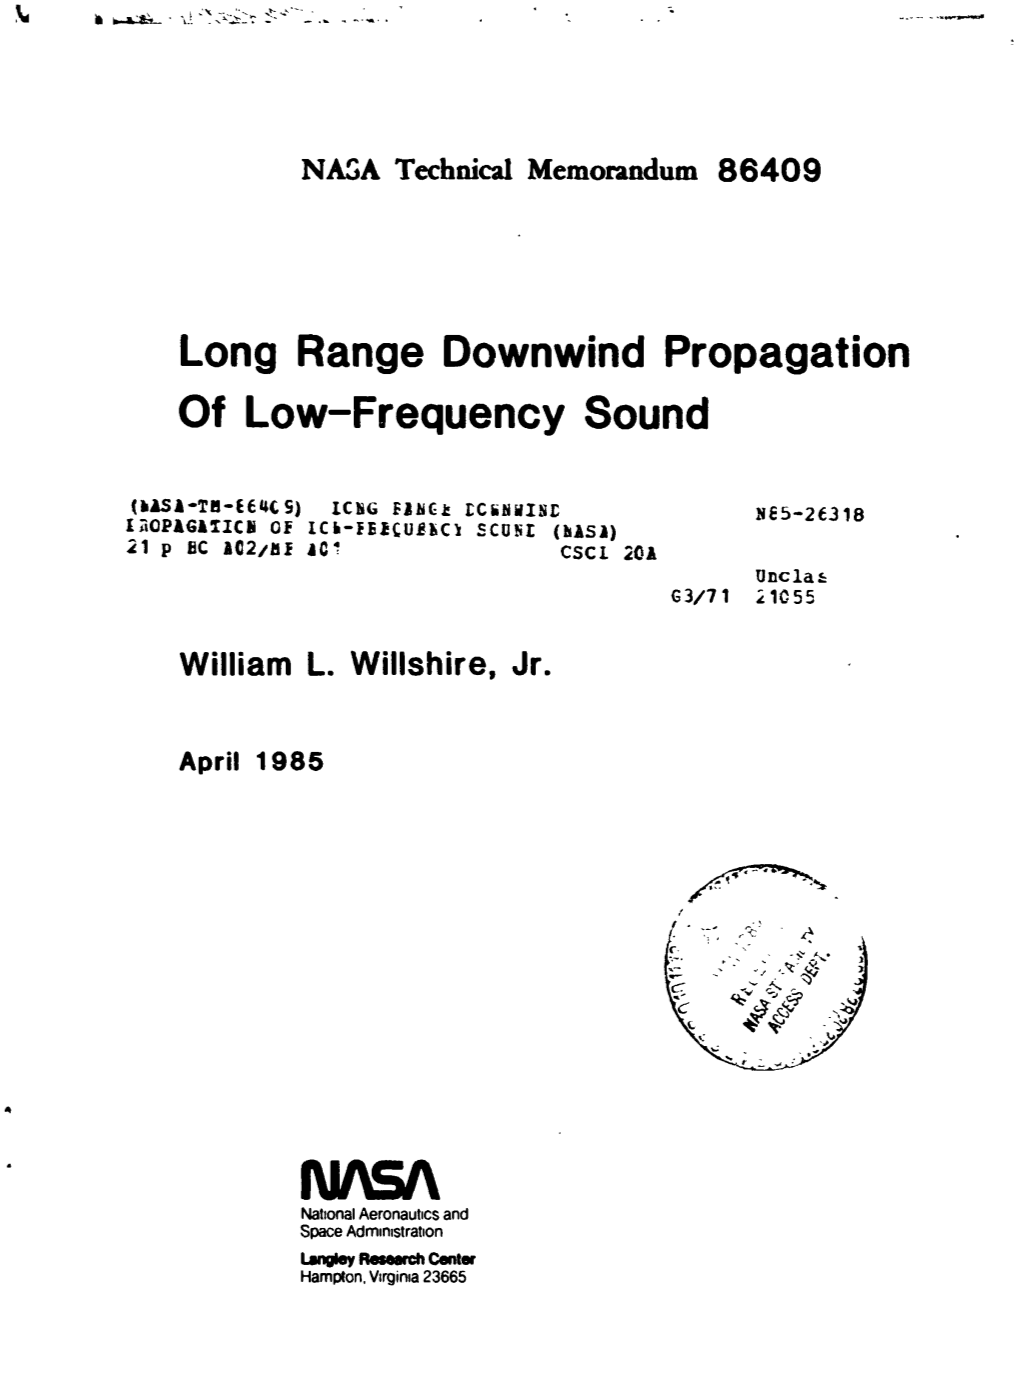 Long Range Downwind Propagation of Low-Frequency Sound